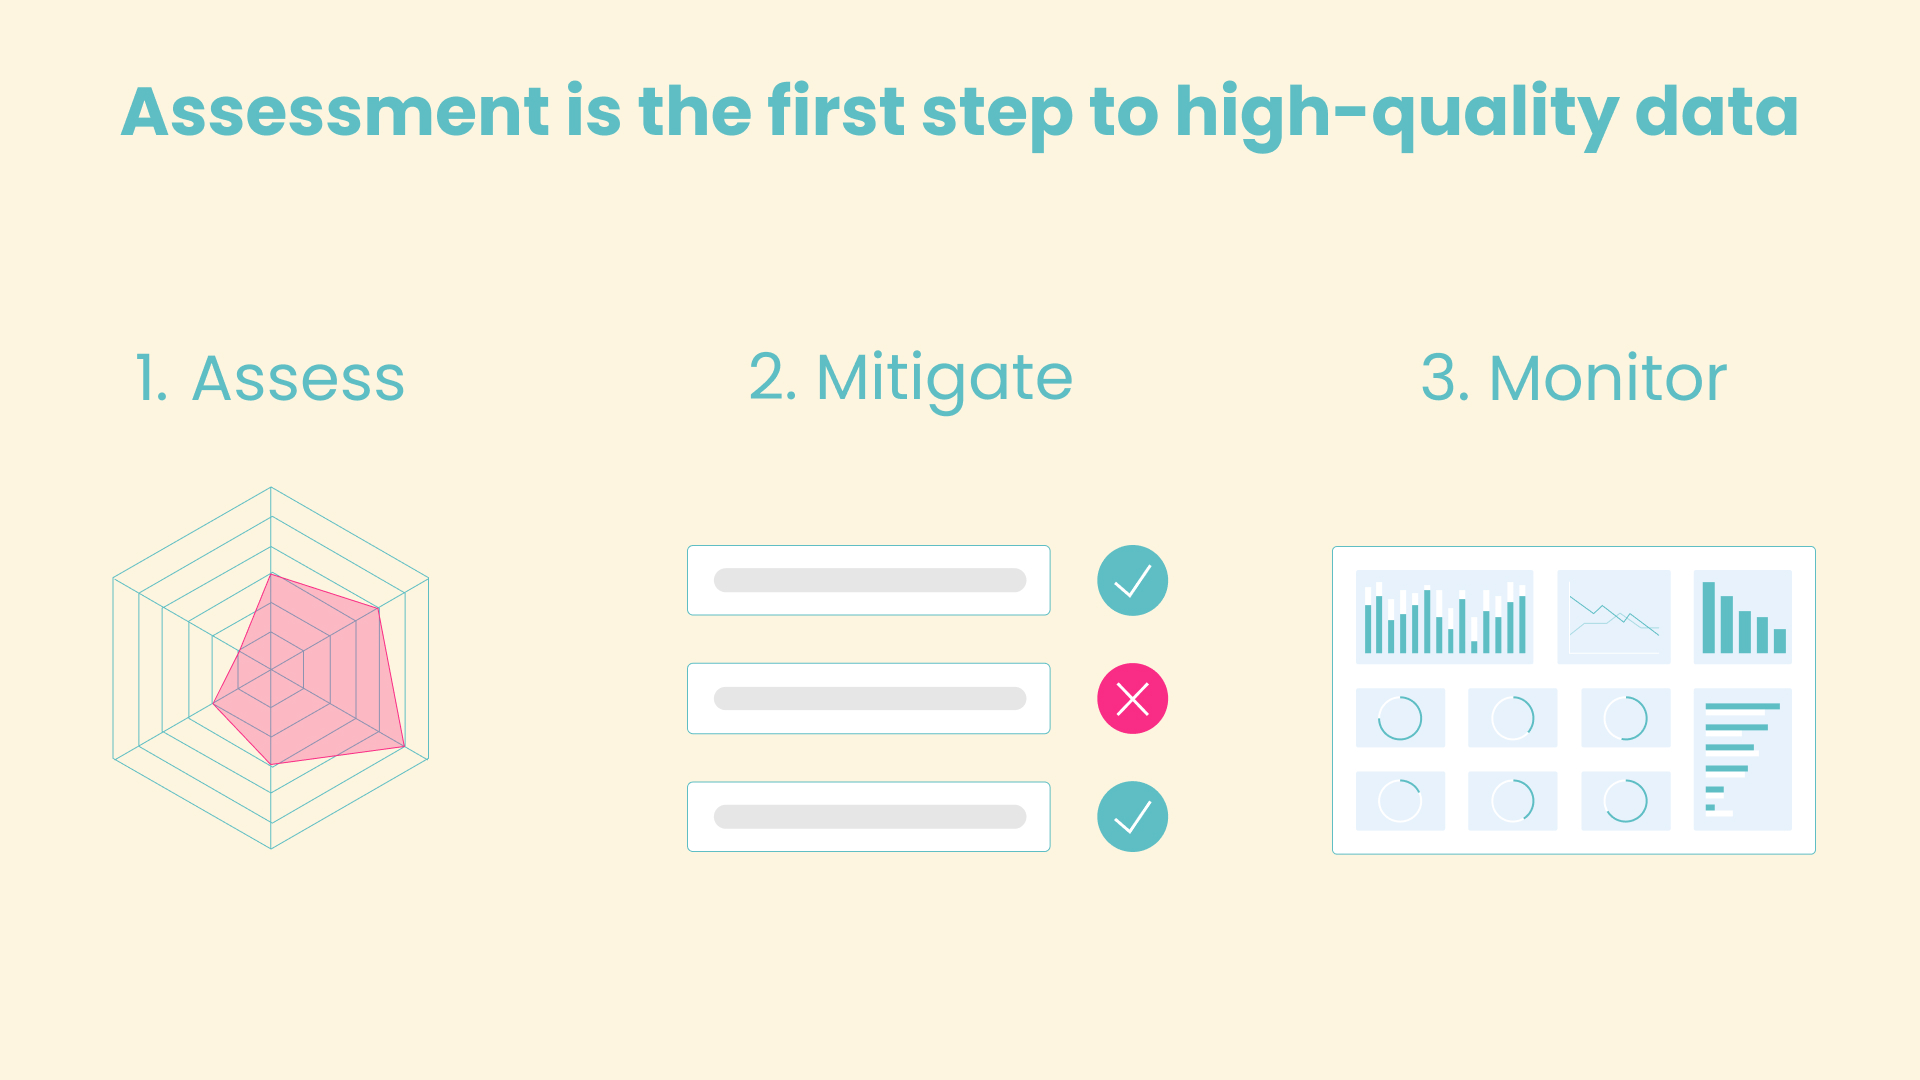 Assessment is the first step for good data quality management followed by mitigation and monitoring.